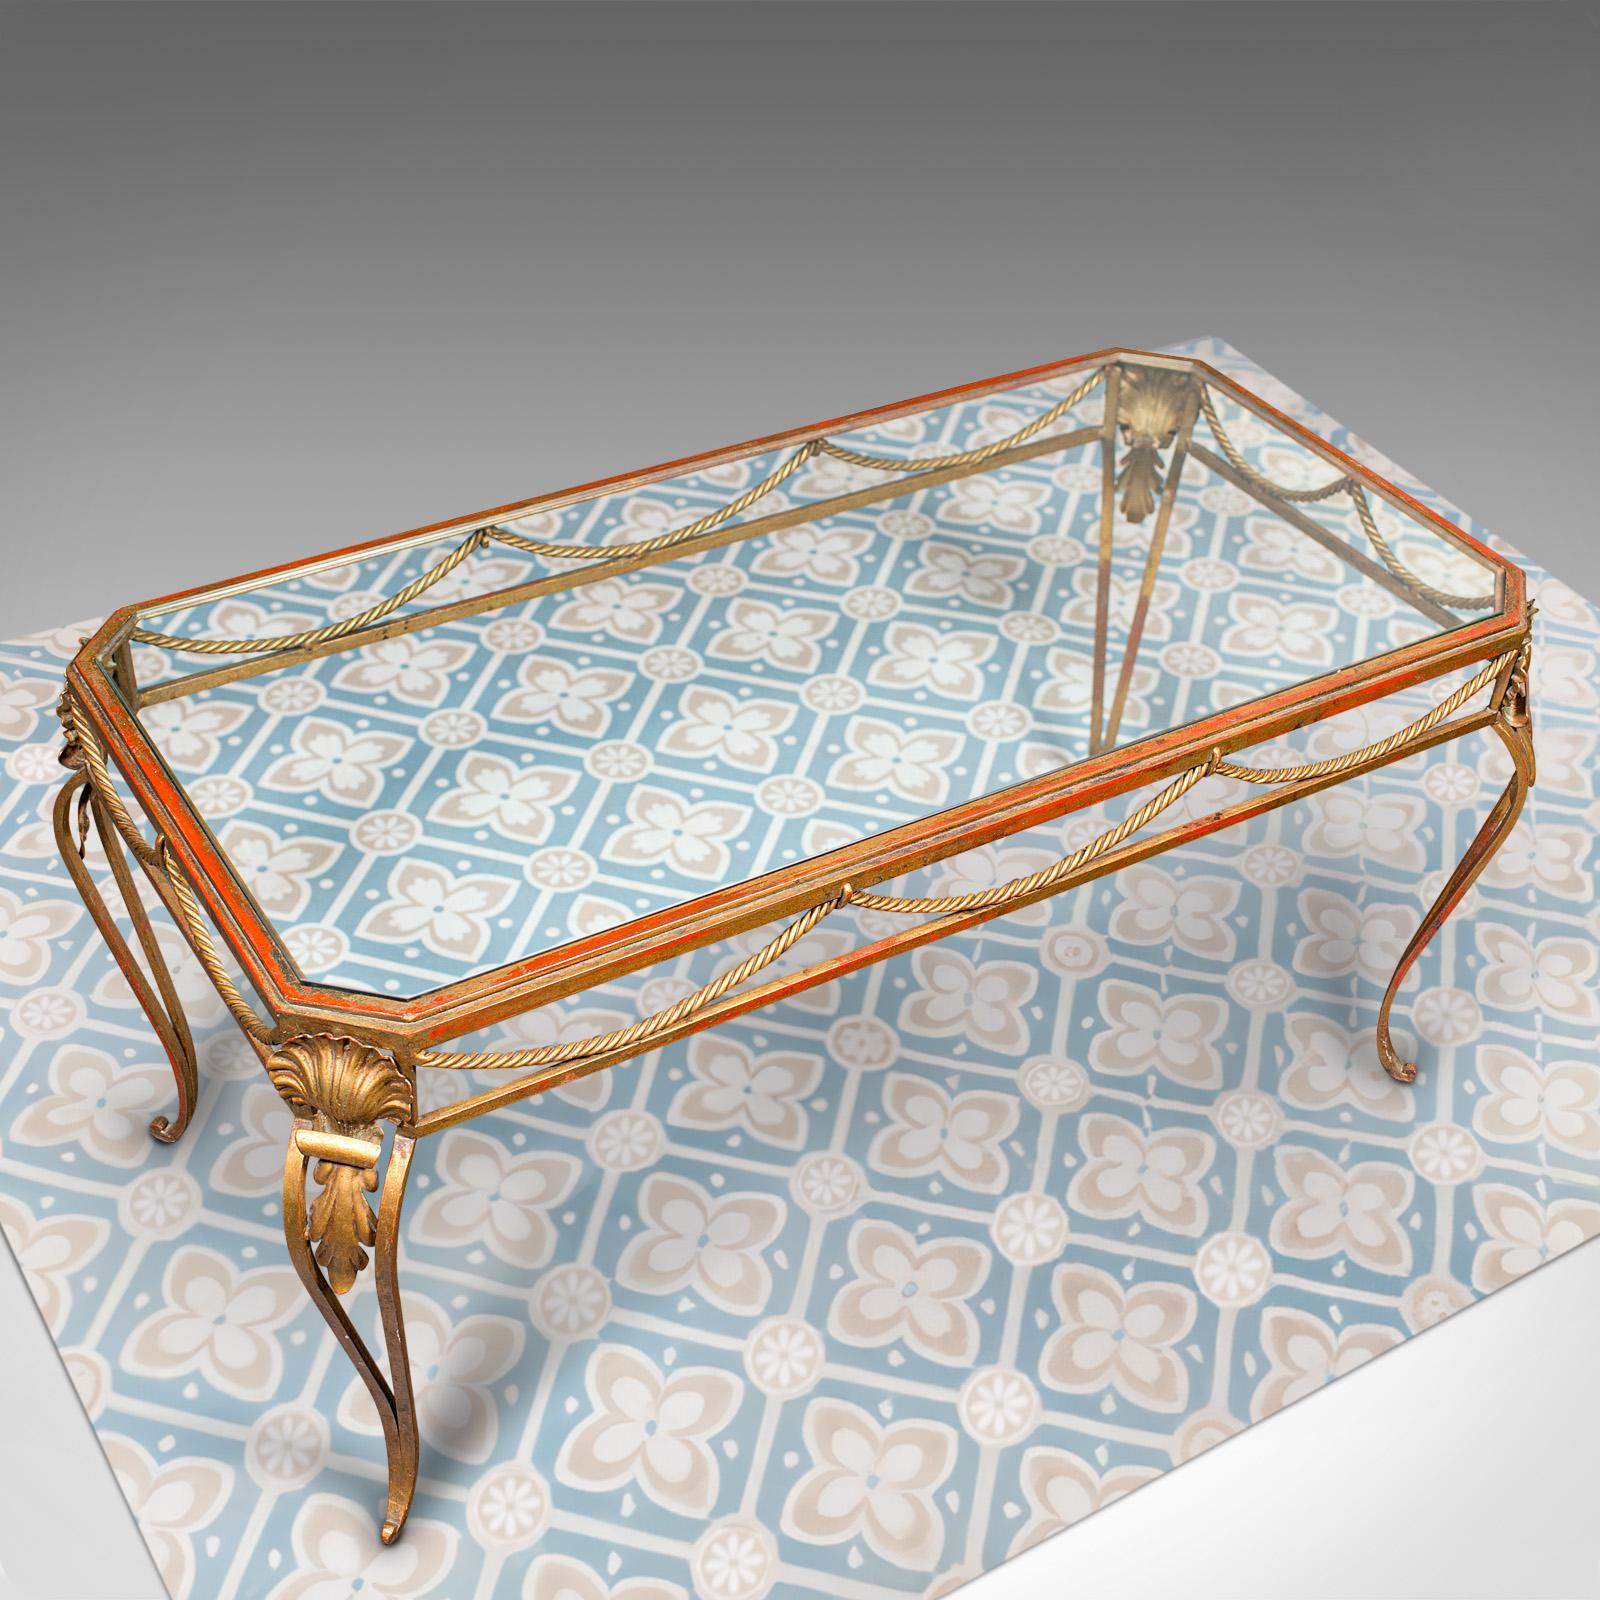 Antique Glazed Coffee Table, French, Brass, Art Nouveau, Early 20th, Circa 1920 For Sale 2